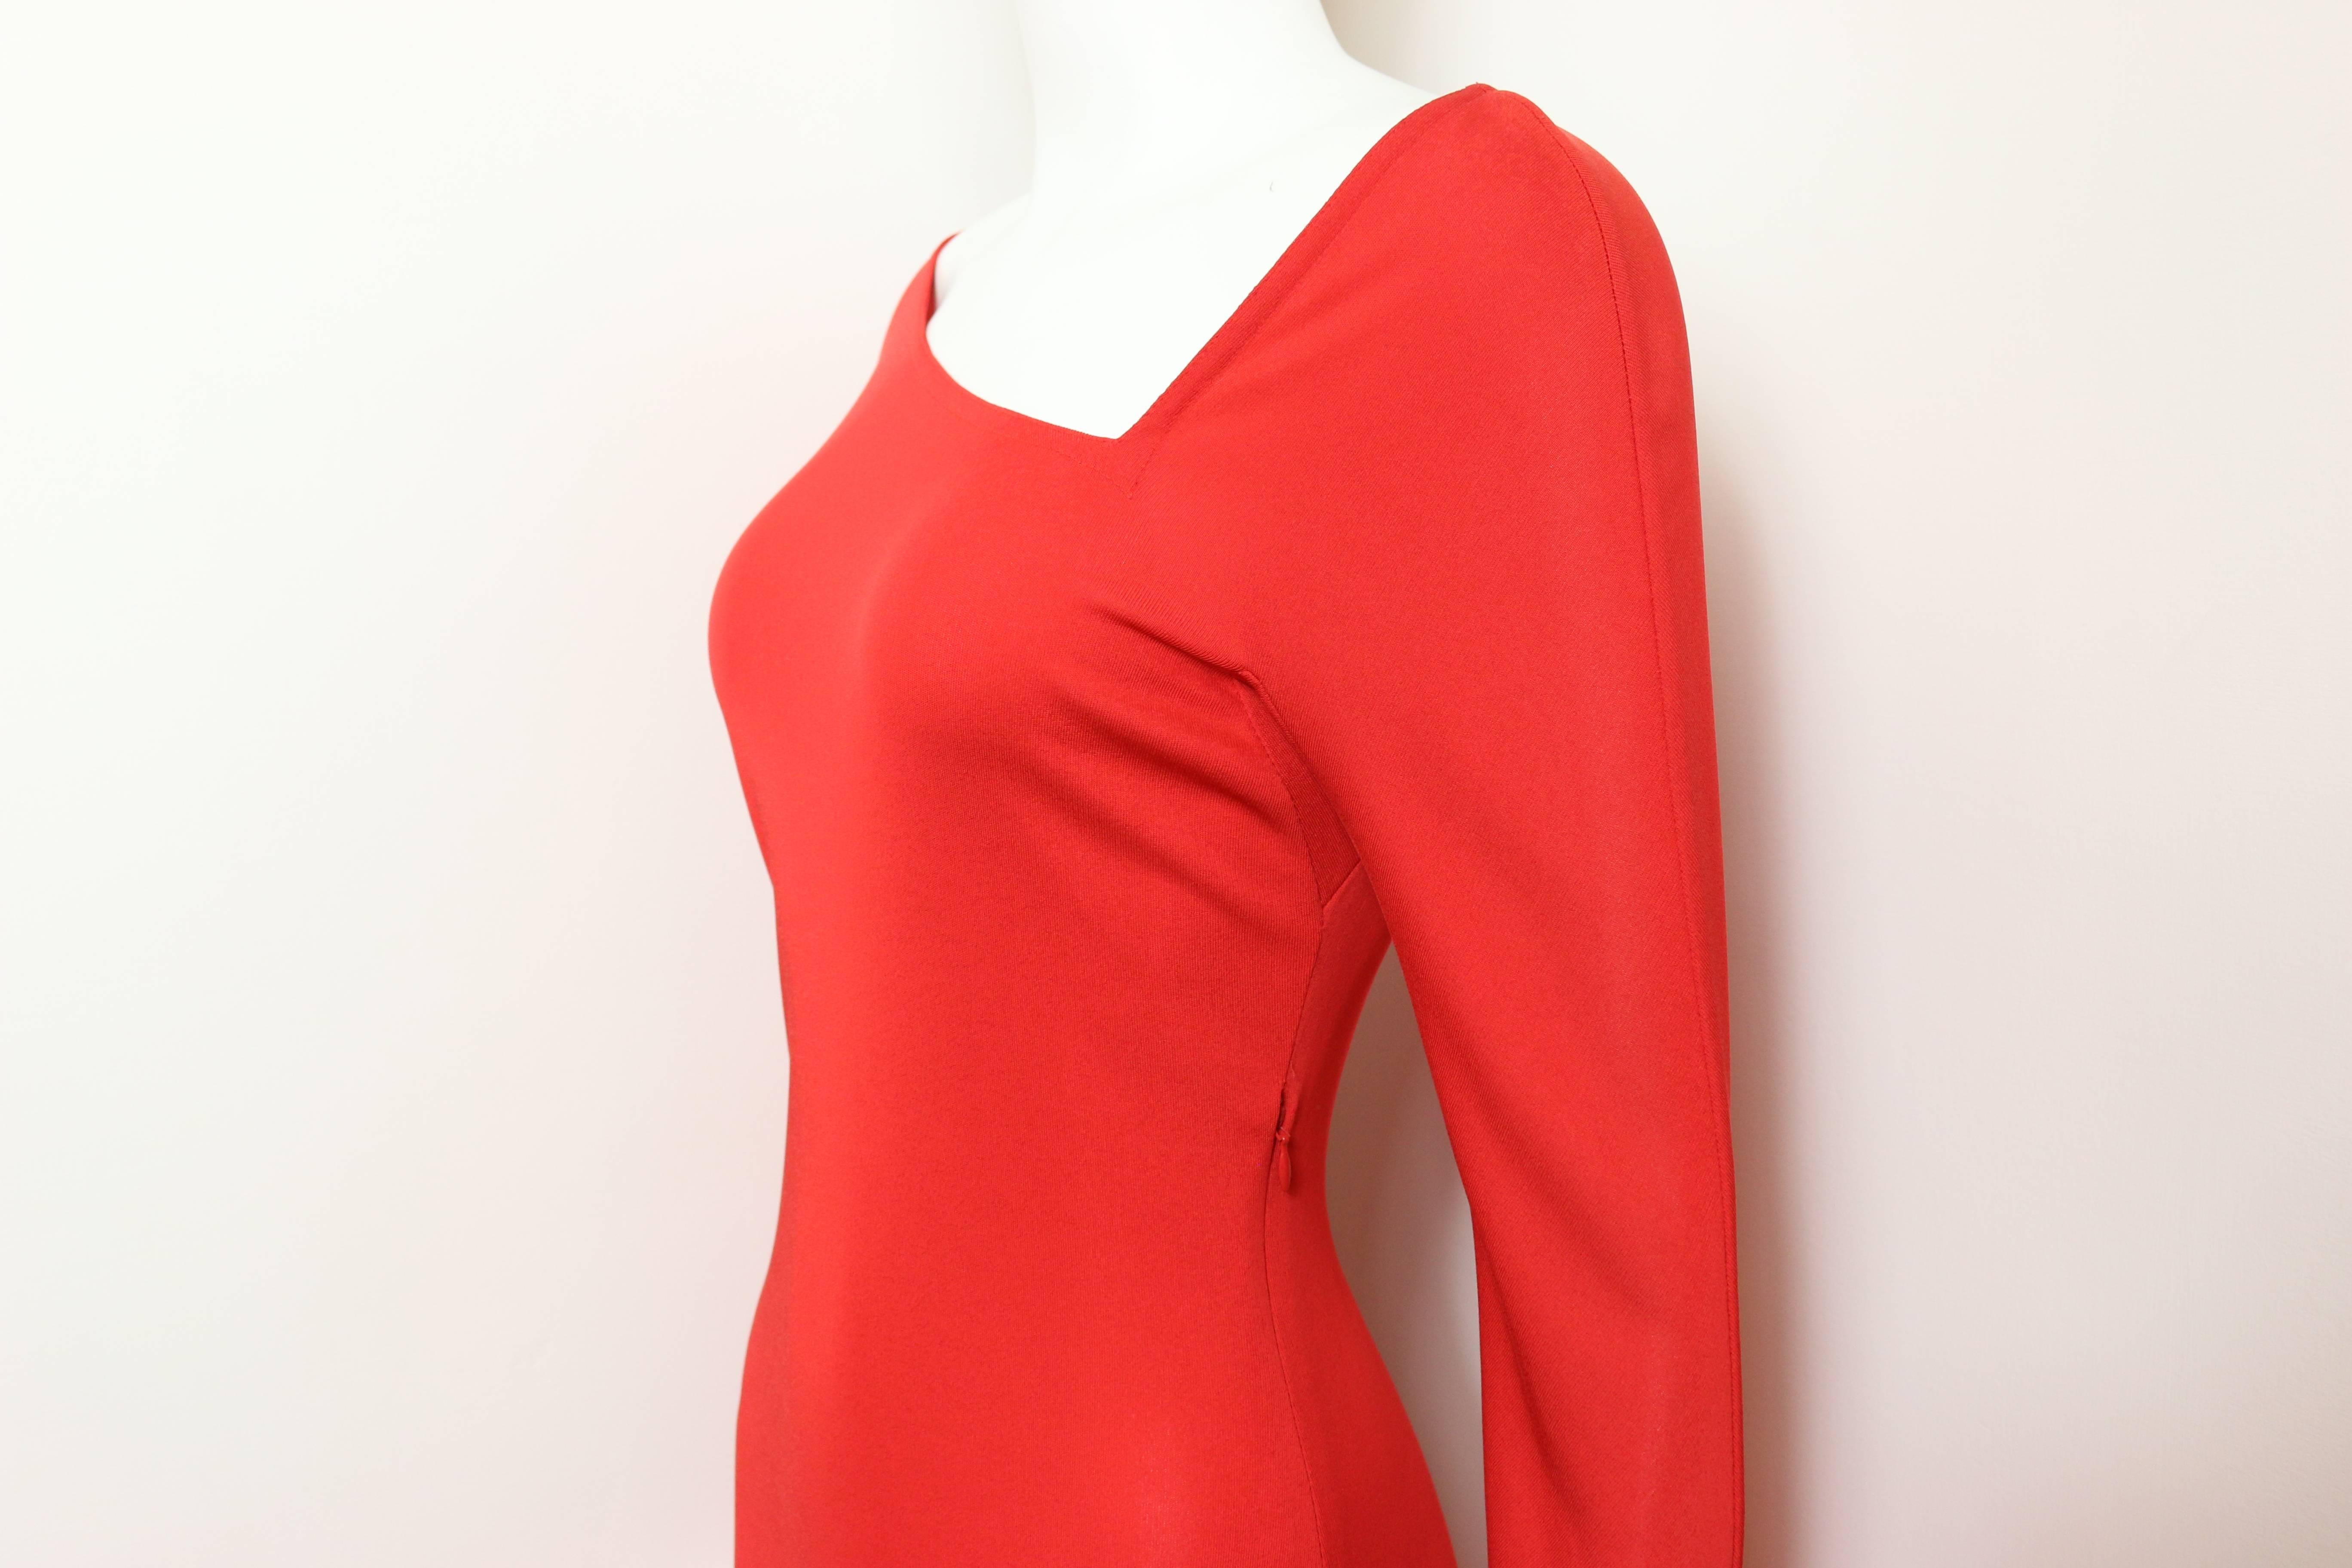 - Vintage 90s Gianni Versace couture red asymmetric dress. 

- Cut out asymmetric detail neckline.

- Knee length asymmetric hemline.

- Fire red long sleeves stretch jersey dress.

- Zipper on the side. 

- 97% Rayon, 3% Silk. 

- Size 42. 
